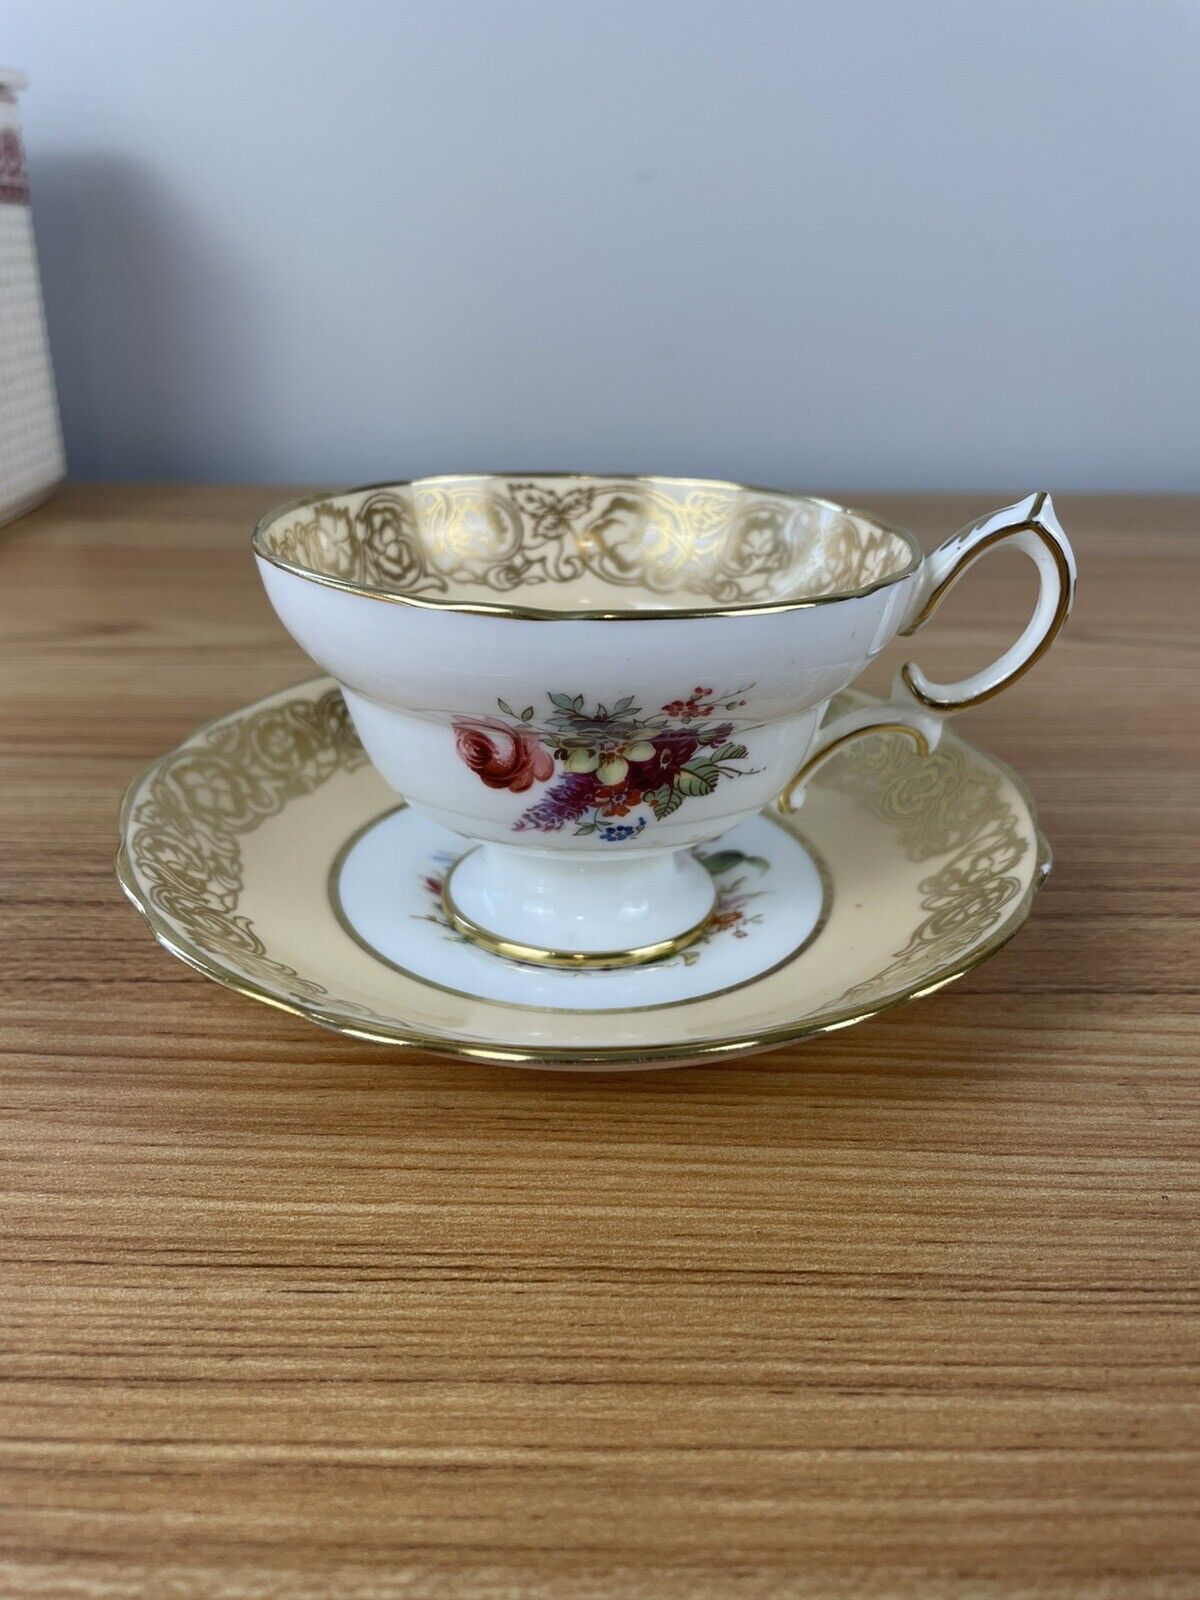 Hammersley Tea cup & Saucer Gold Floral Footed Cup Vintage England Bone China